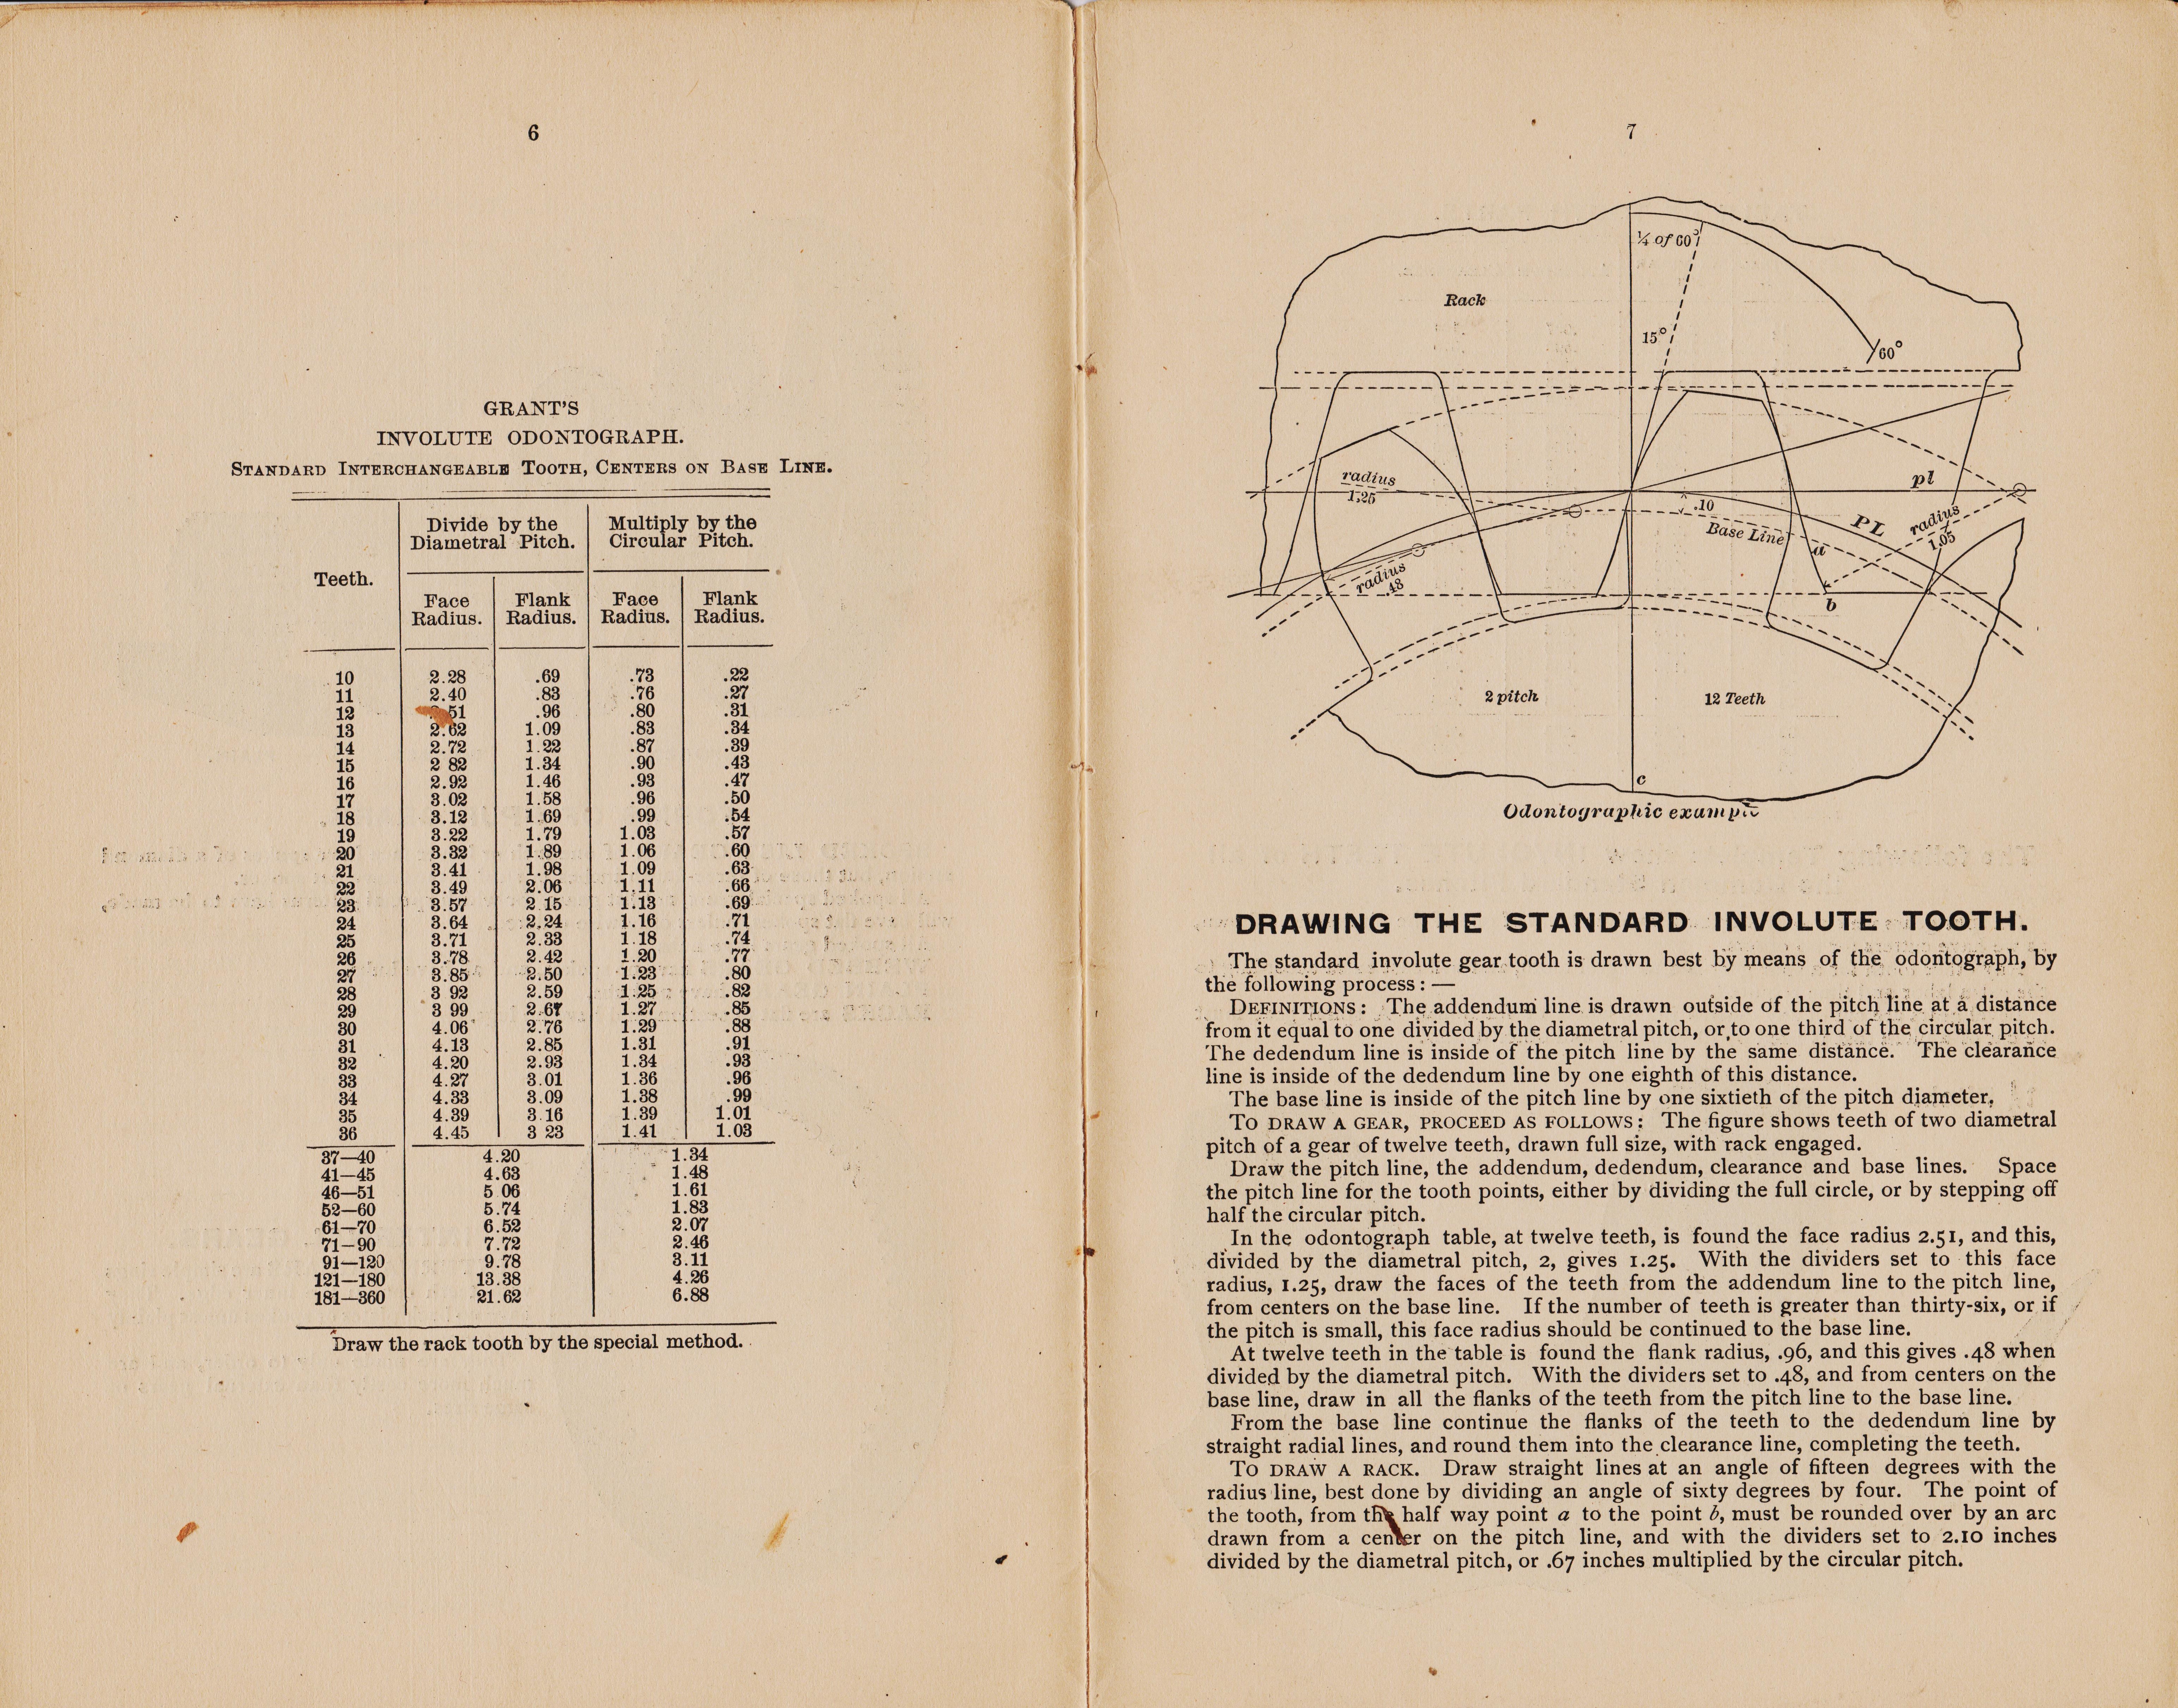 http://antiquemachinery.com/images-2020/Grants-Gear-Book-Lexington-Gear-Works-1892-page-6-7-drawing-the-standard-Involute-Gear-Tooth.jpg